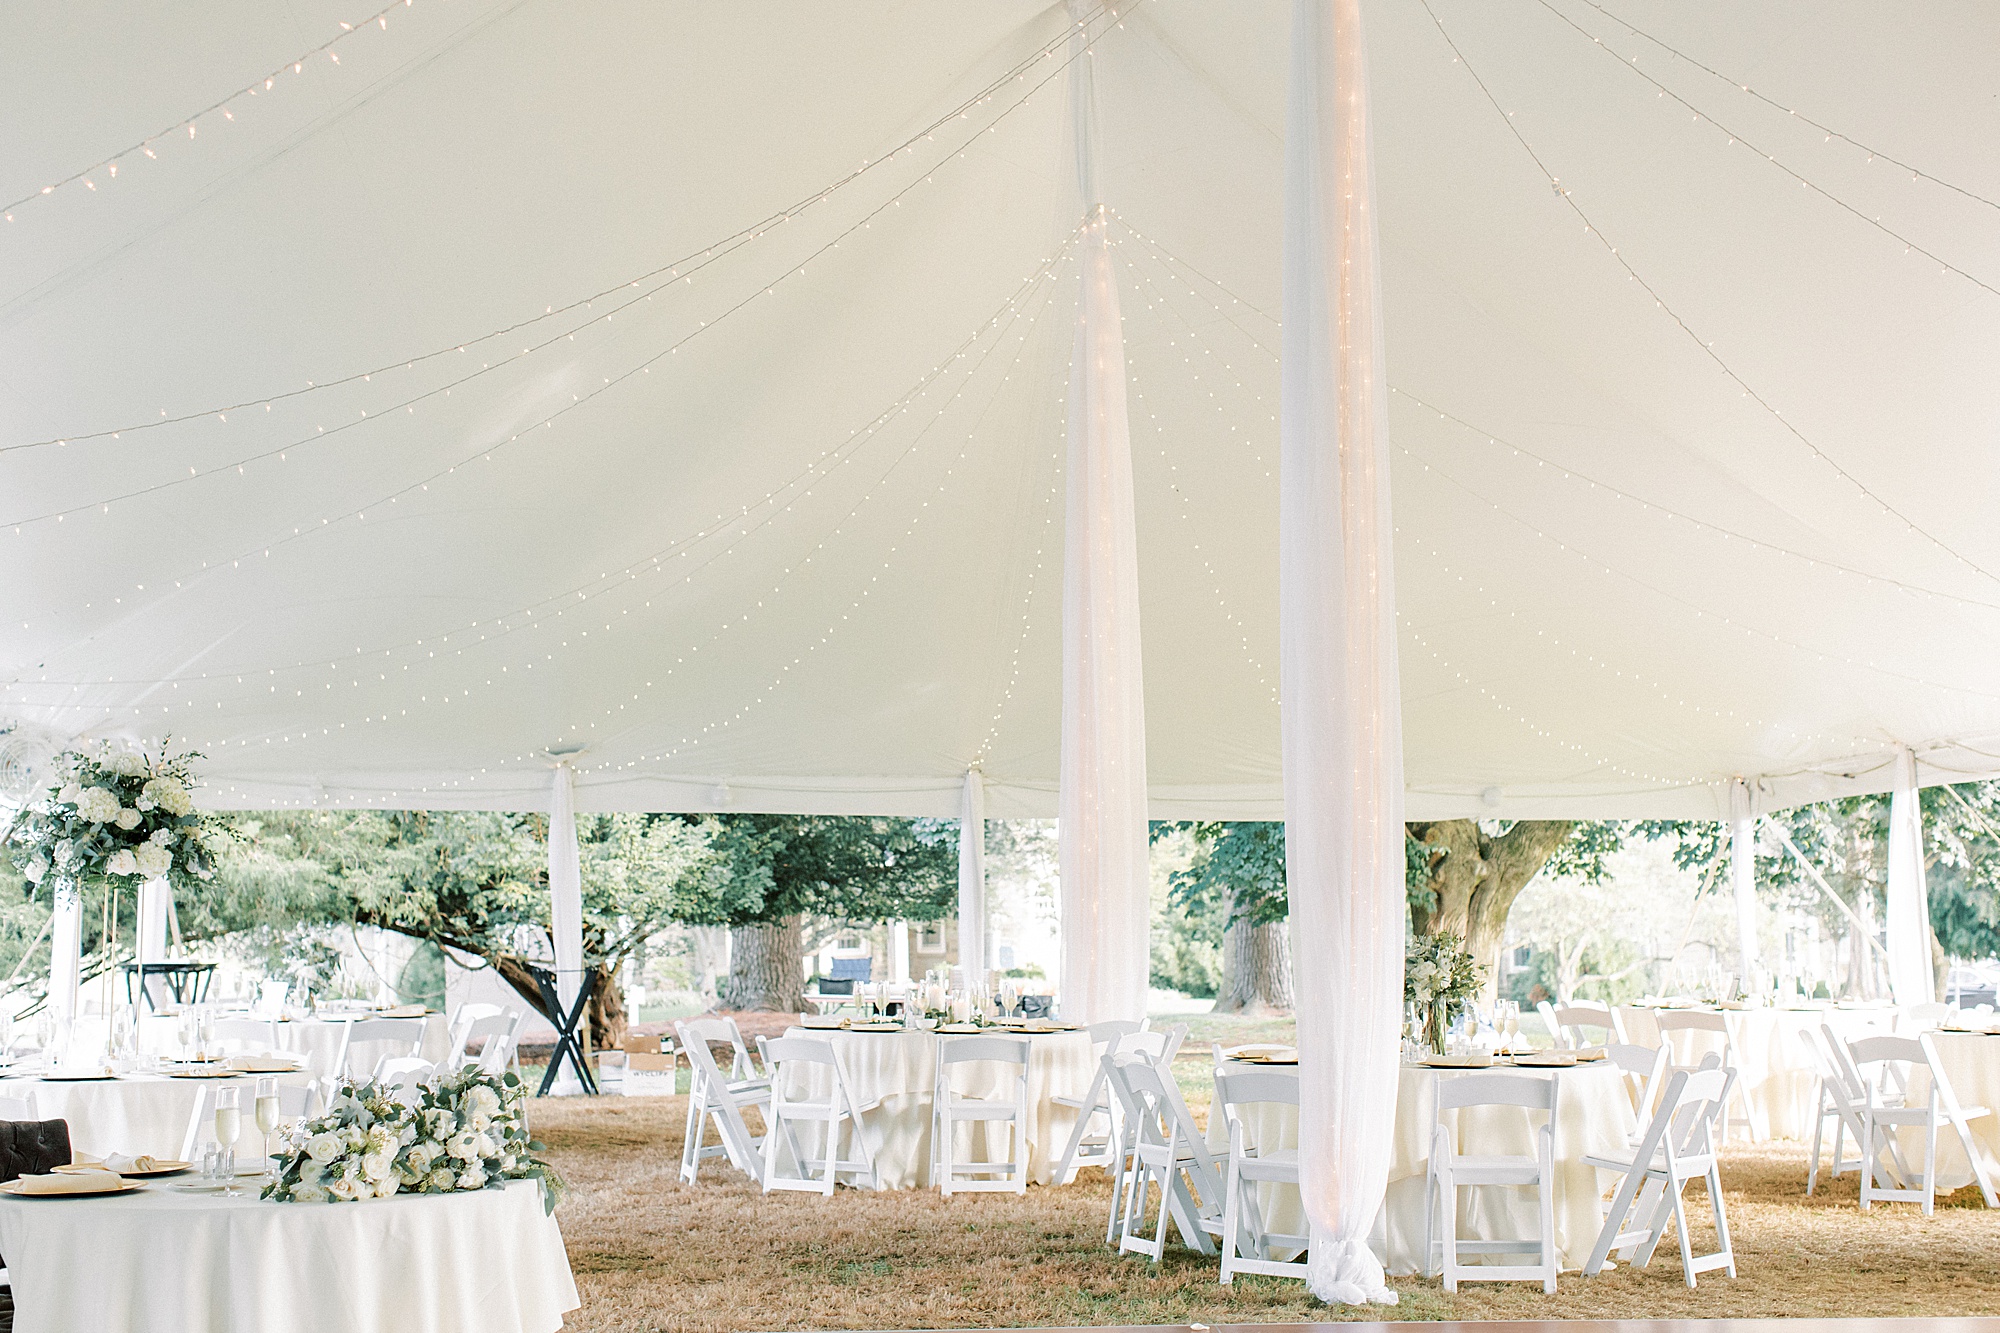 tented wedding reception on lawn at. The Ballroom at Ellis Preserve